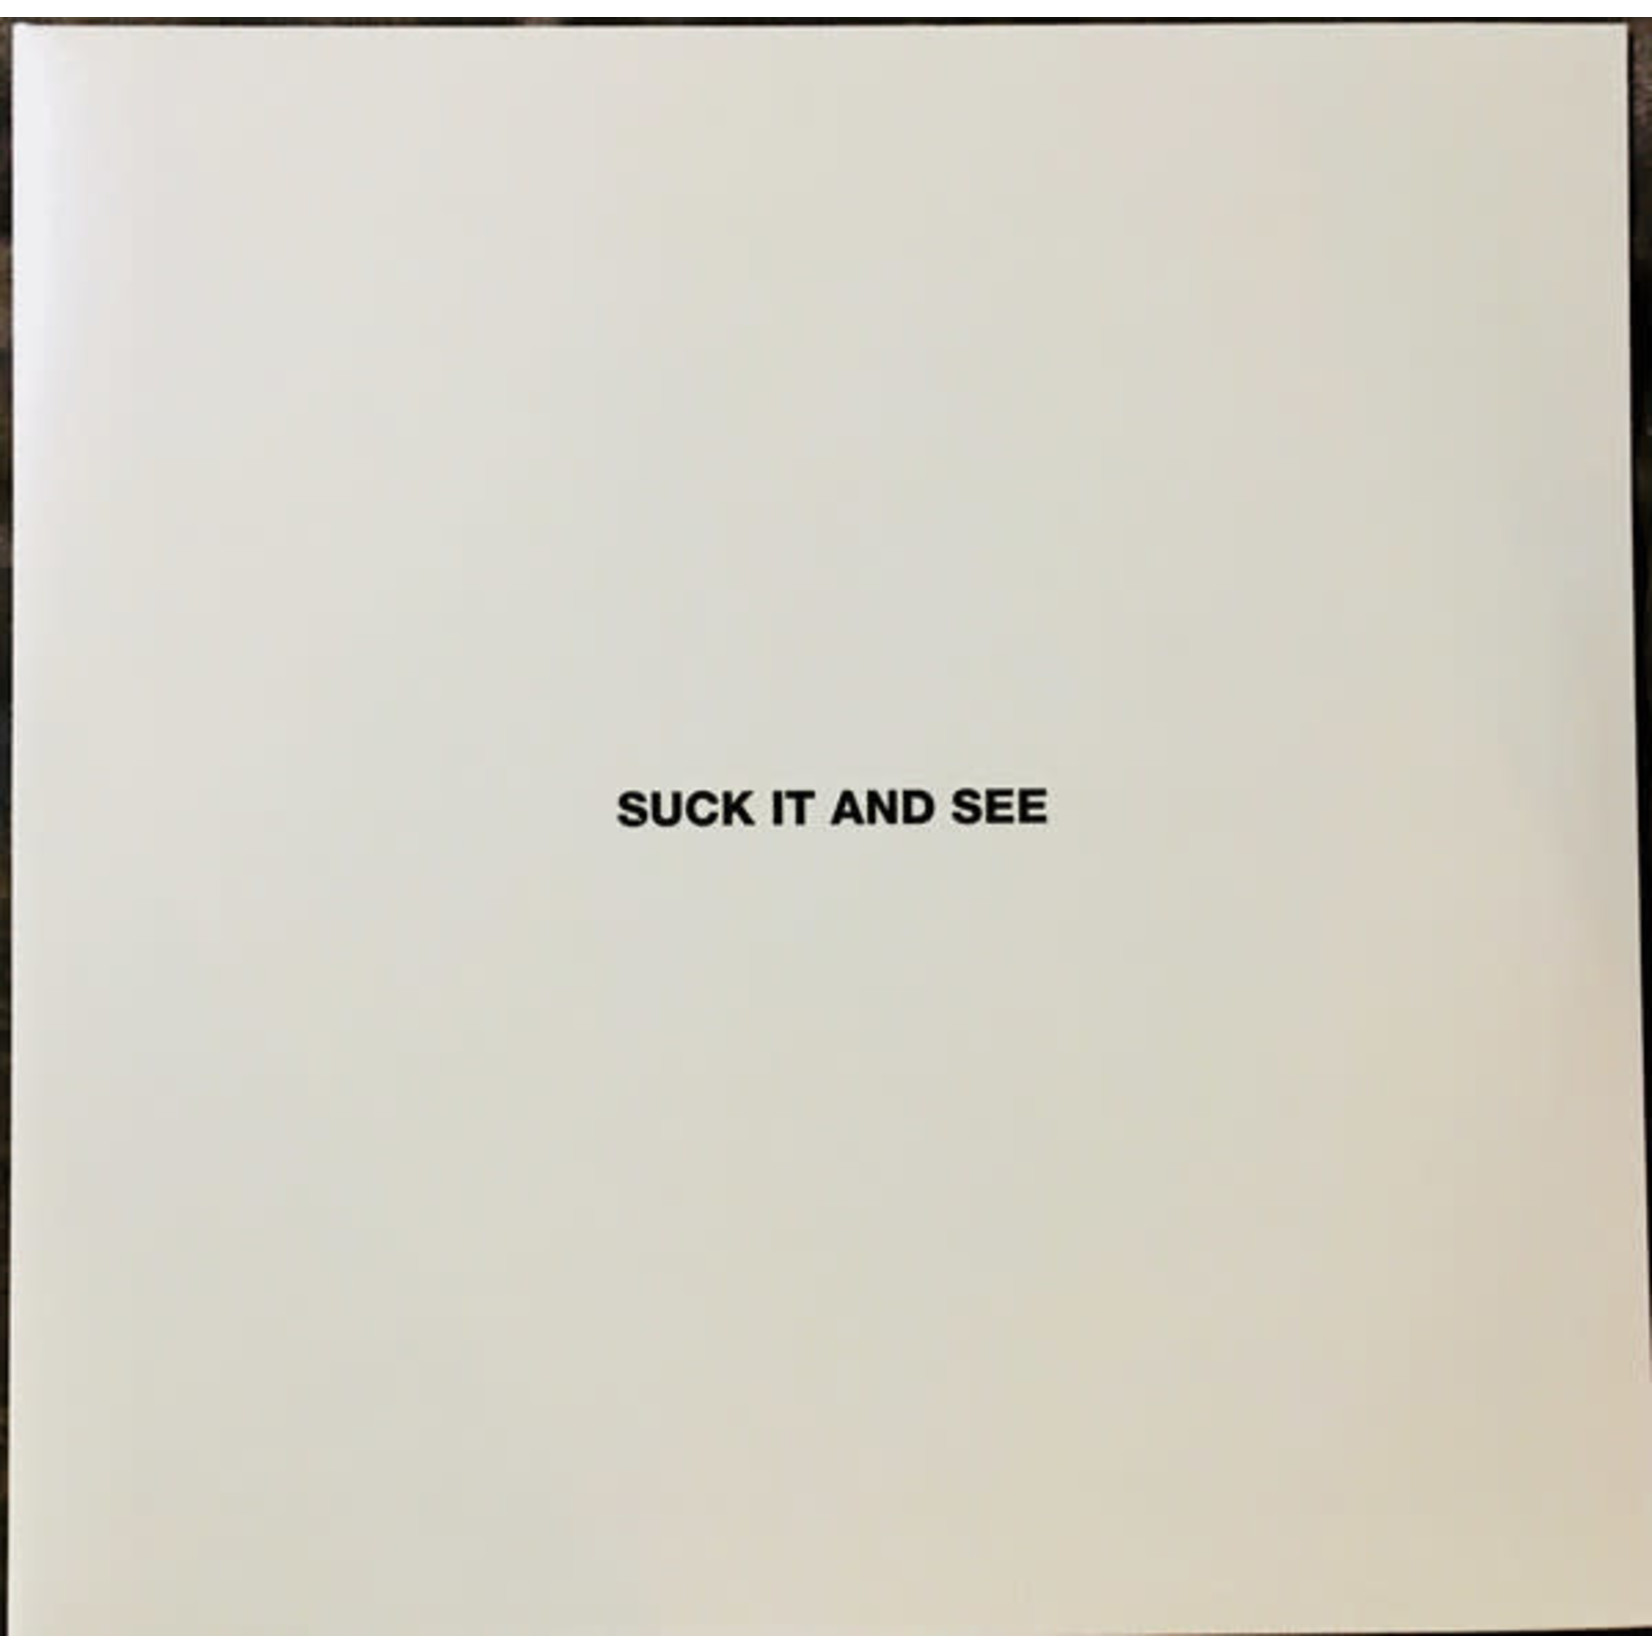 Domino Arctic Monkeys - Suck It And See (LP)